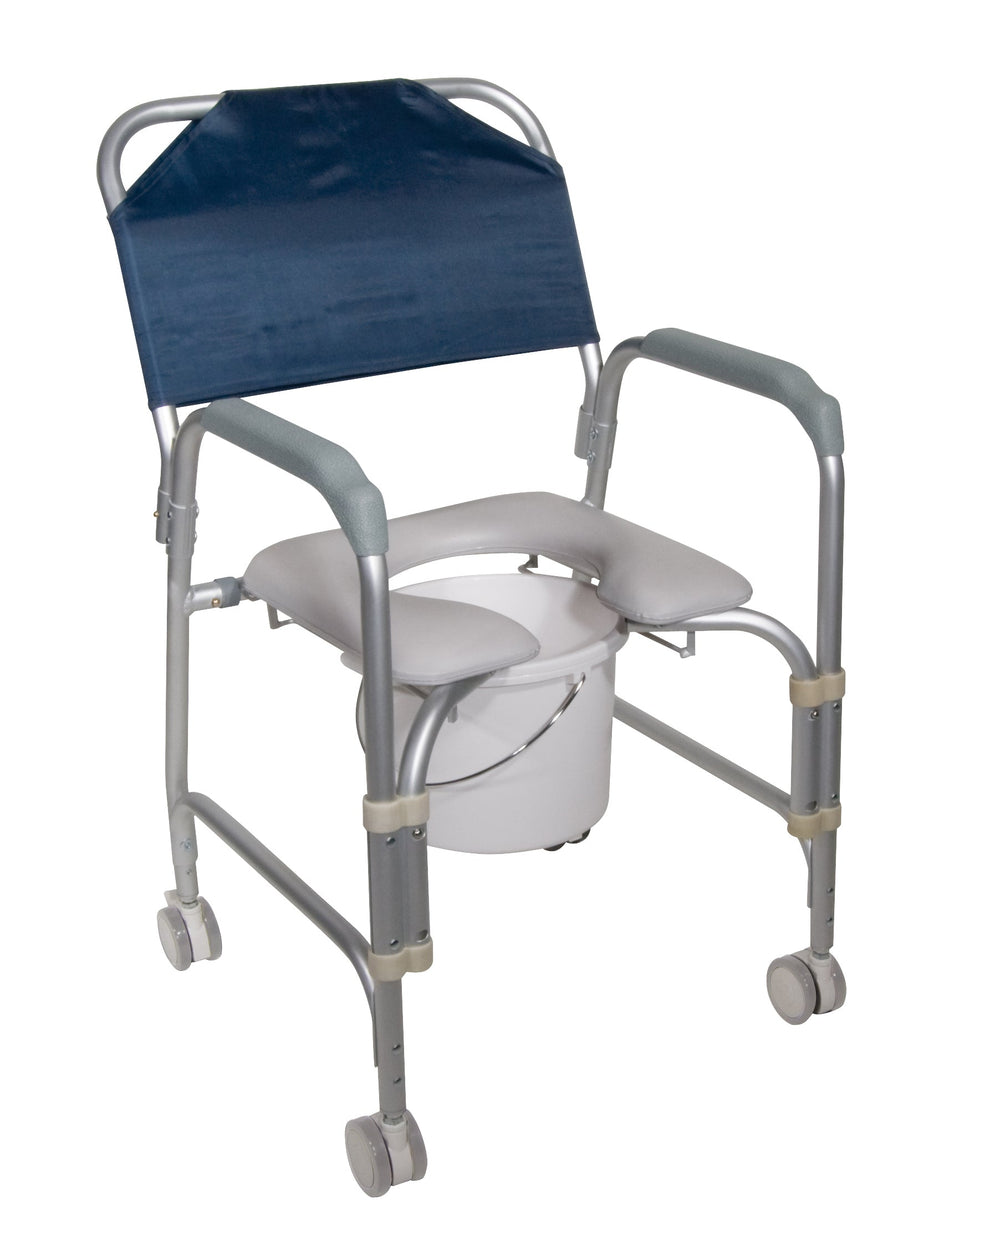 Lightweight Portable Shower Commode Chair with Casters - No Insurance Medical Supplies